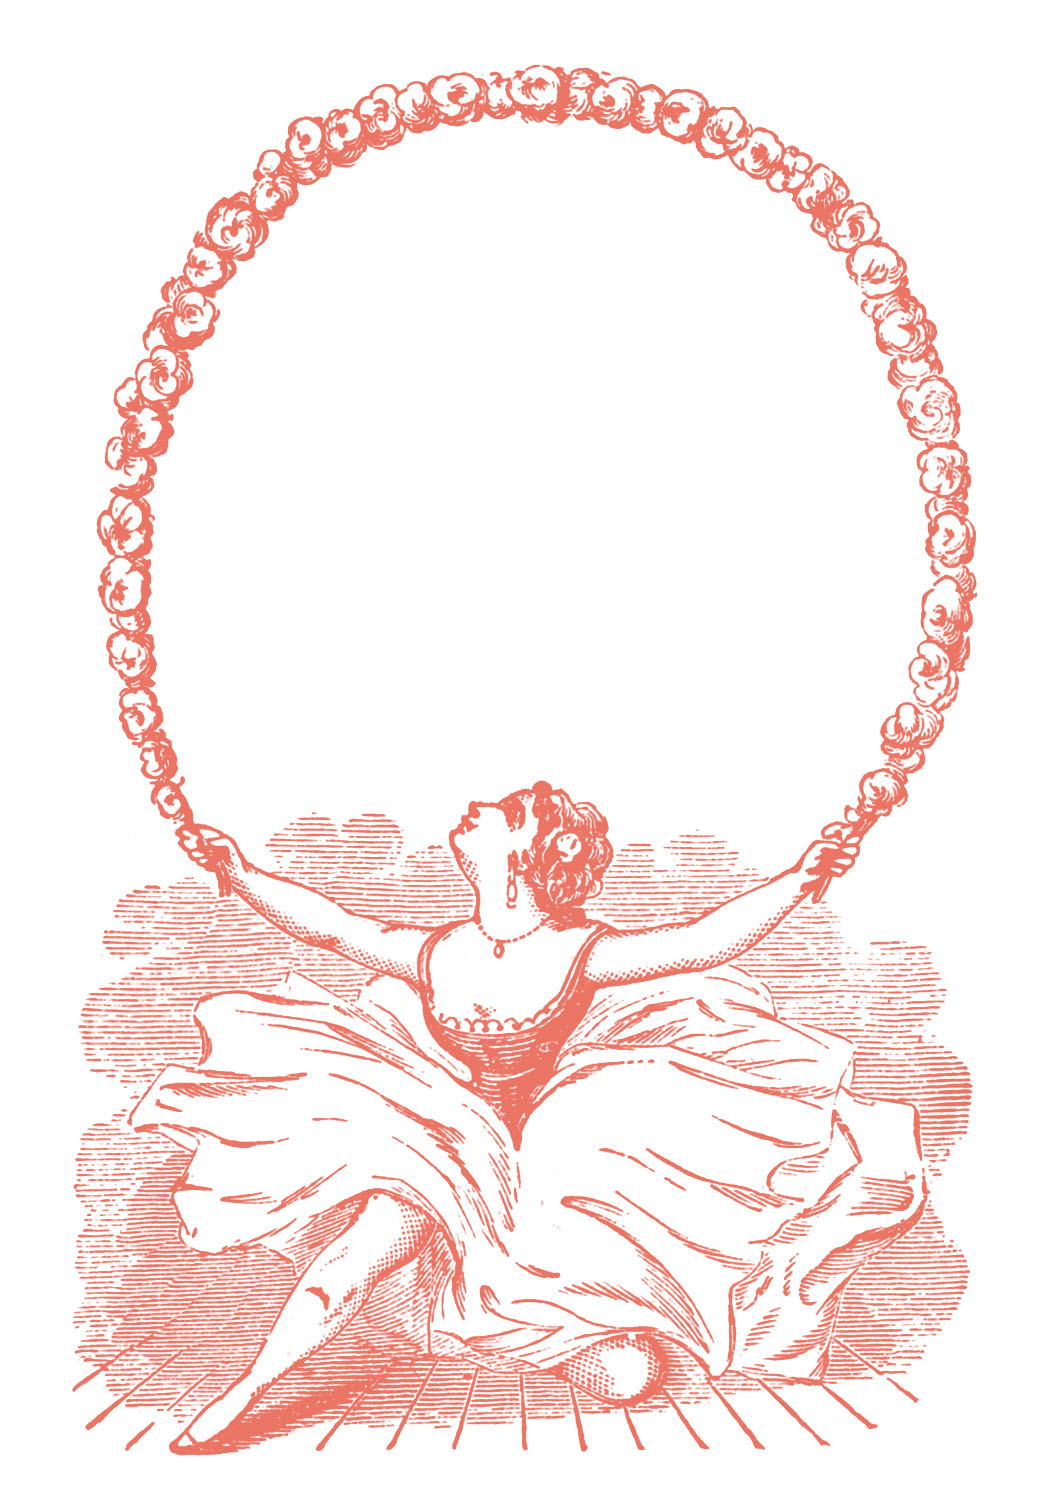 Vintage Clip Art   Ballerina With Garland   Graphic Frame   The